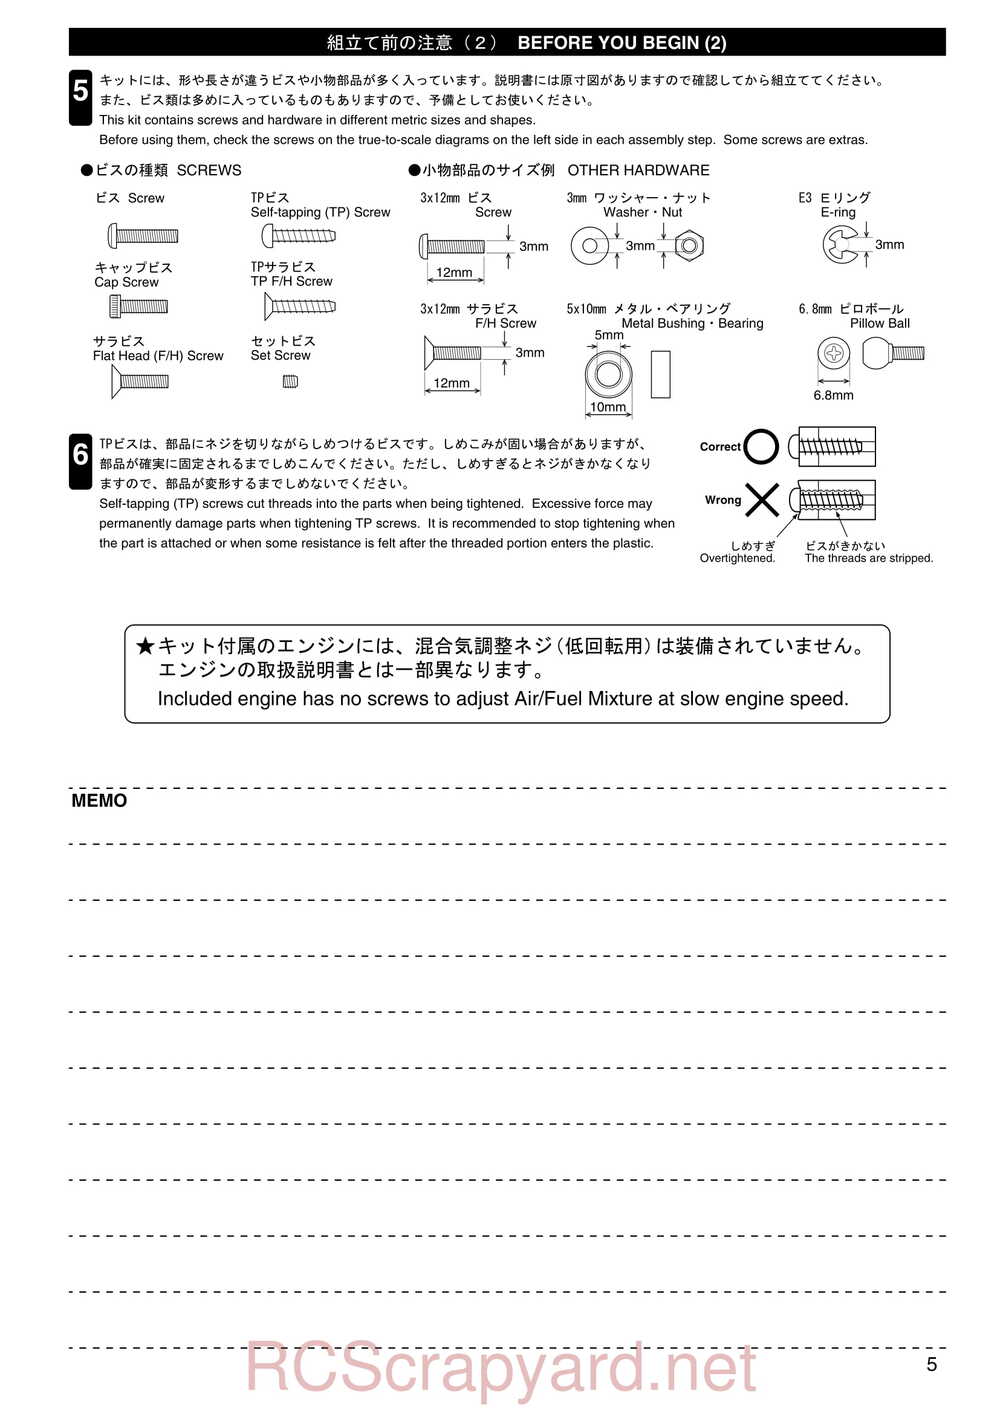 Kyosho - 31061 - TR-15 Rally - Manual - Page 05